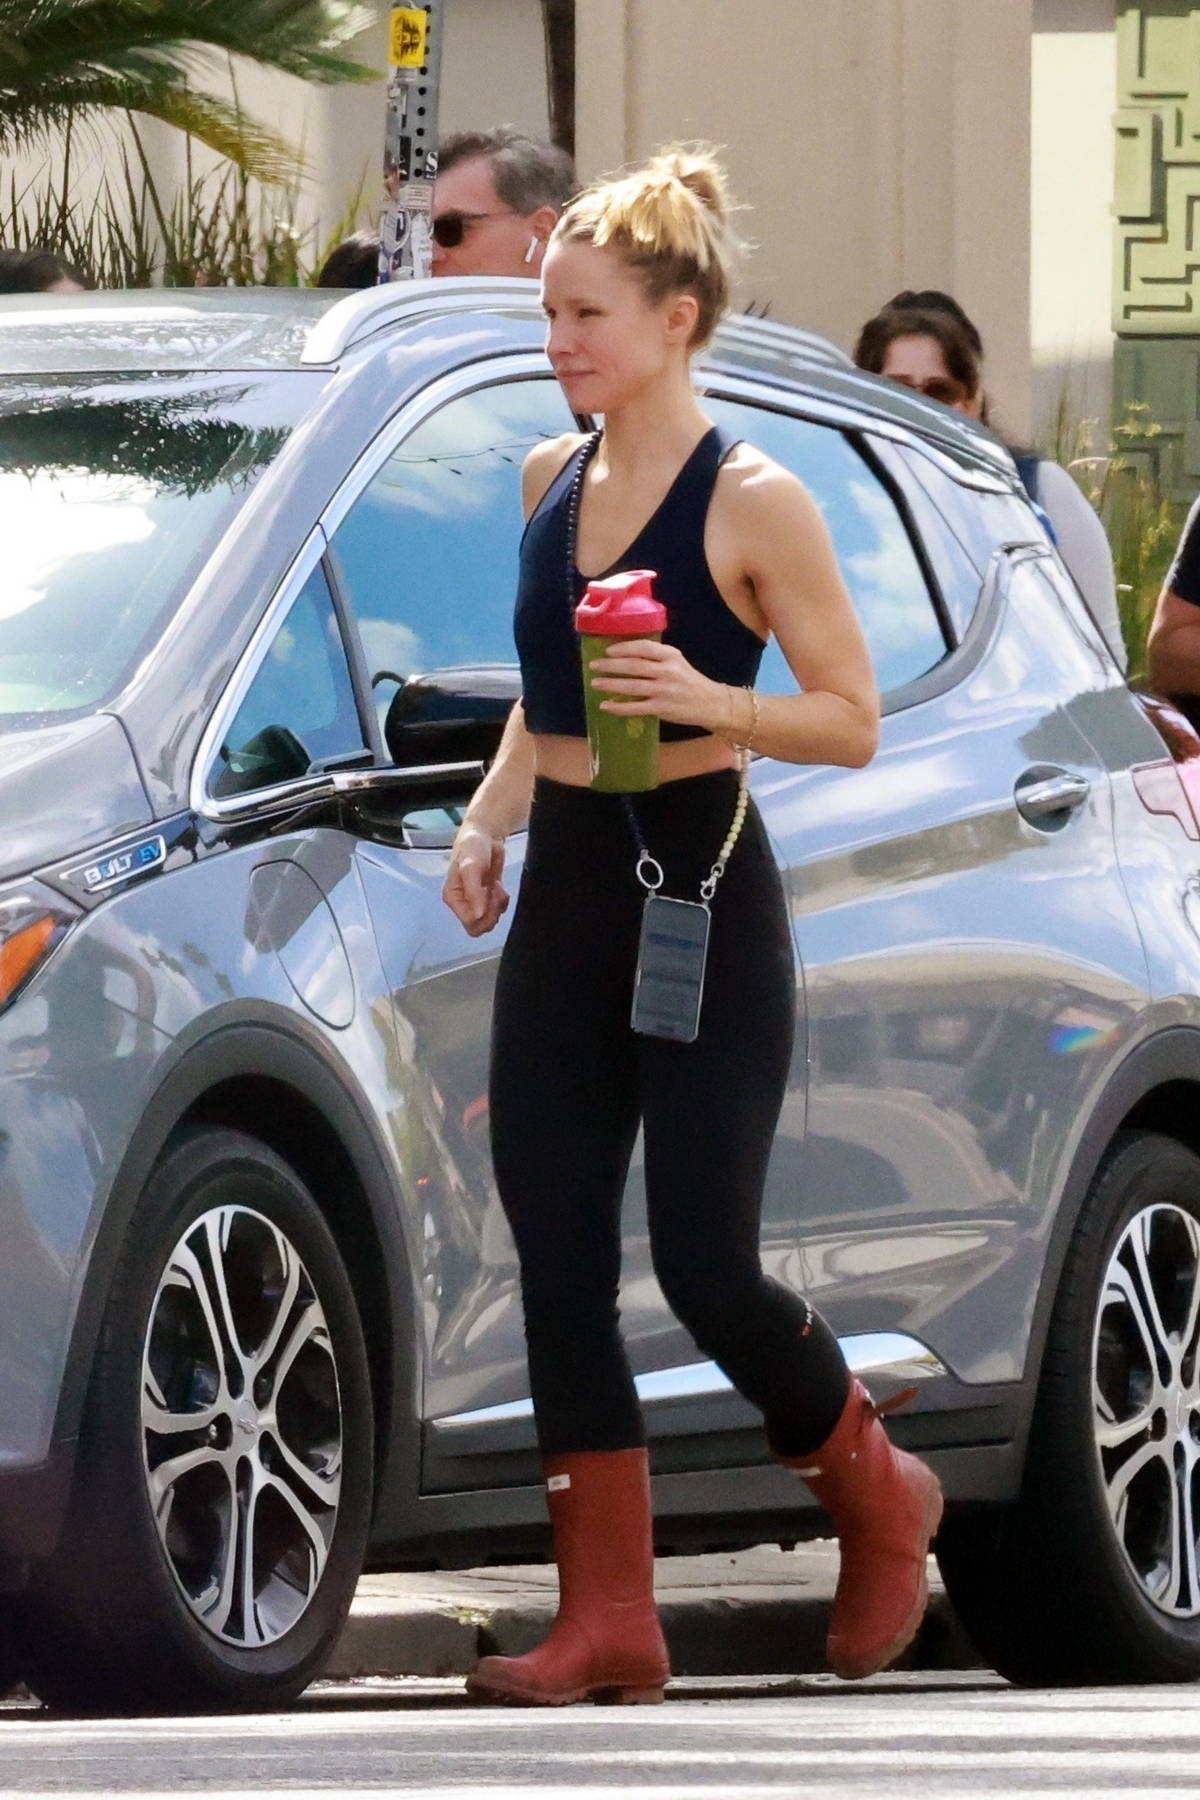 Kristen Bell shows off her athletic physique in tank top and leggings while  attending her Pilates